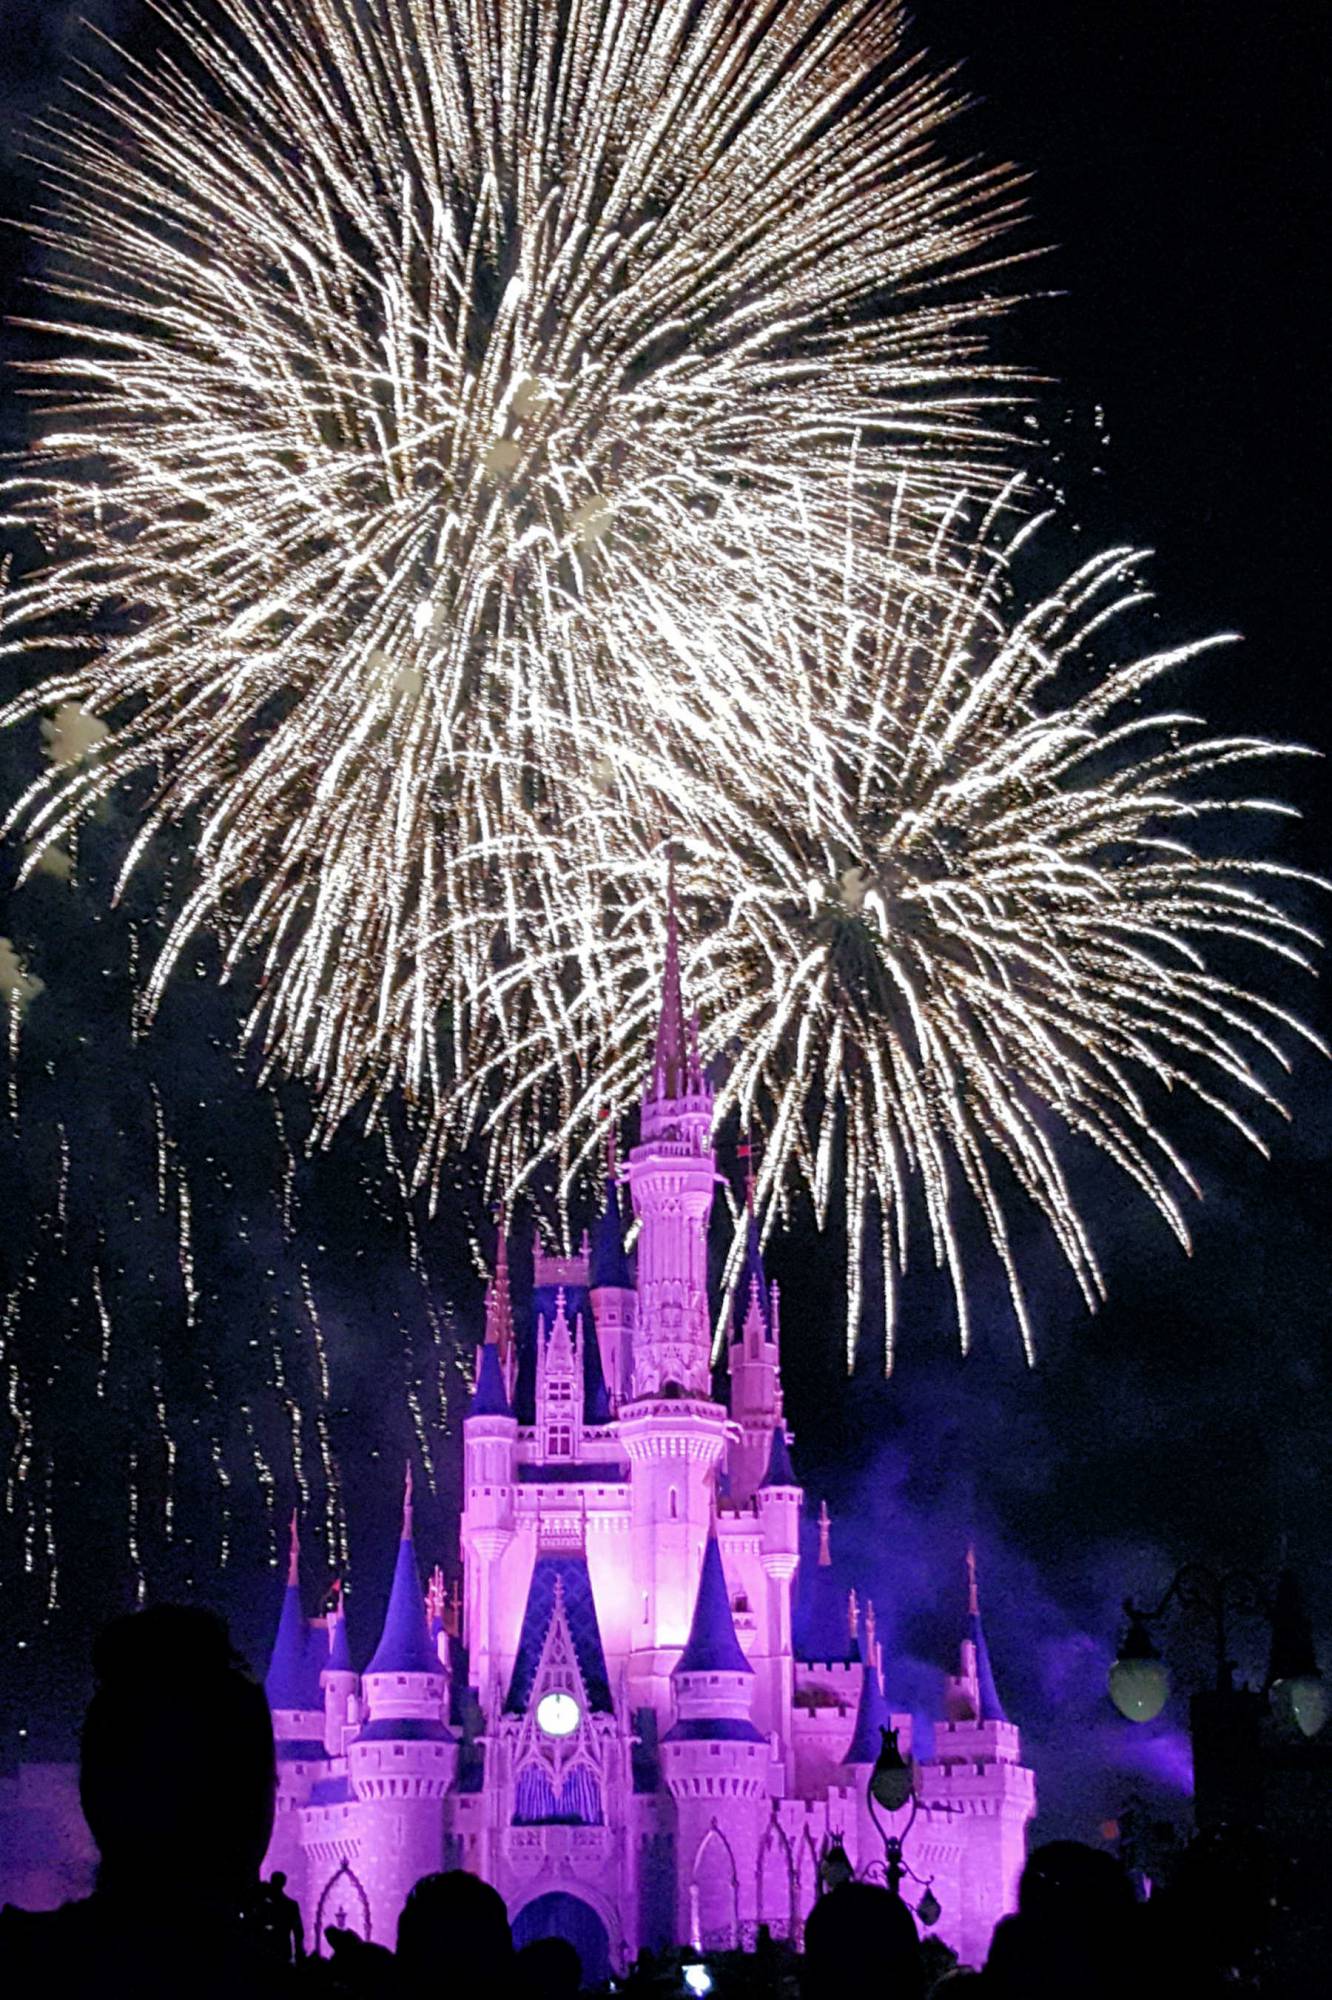 Saying a fond farewell to 'Wishes' at the Magic Kingdom | PassPorter.com